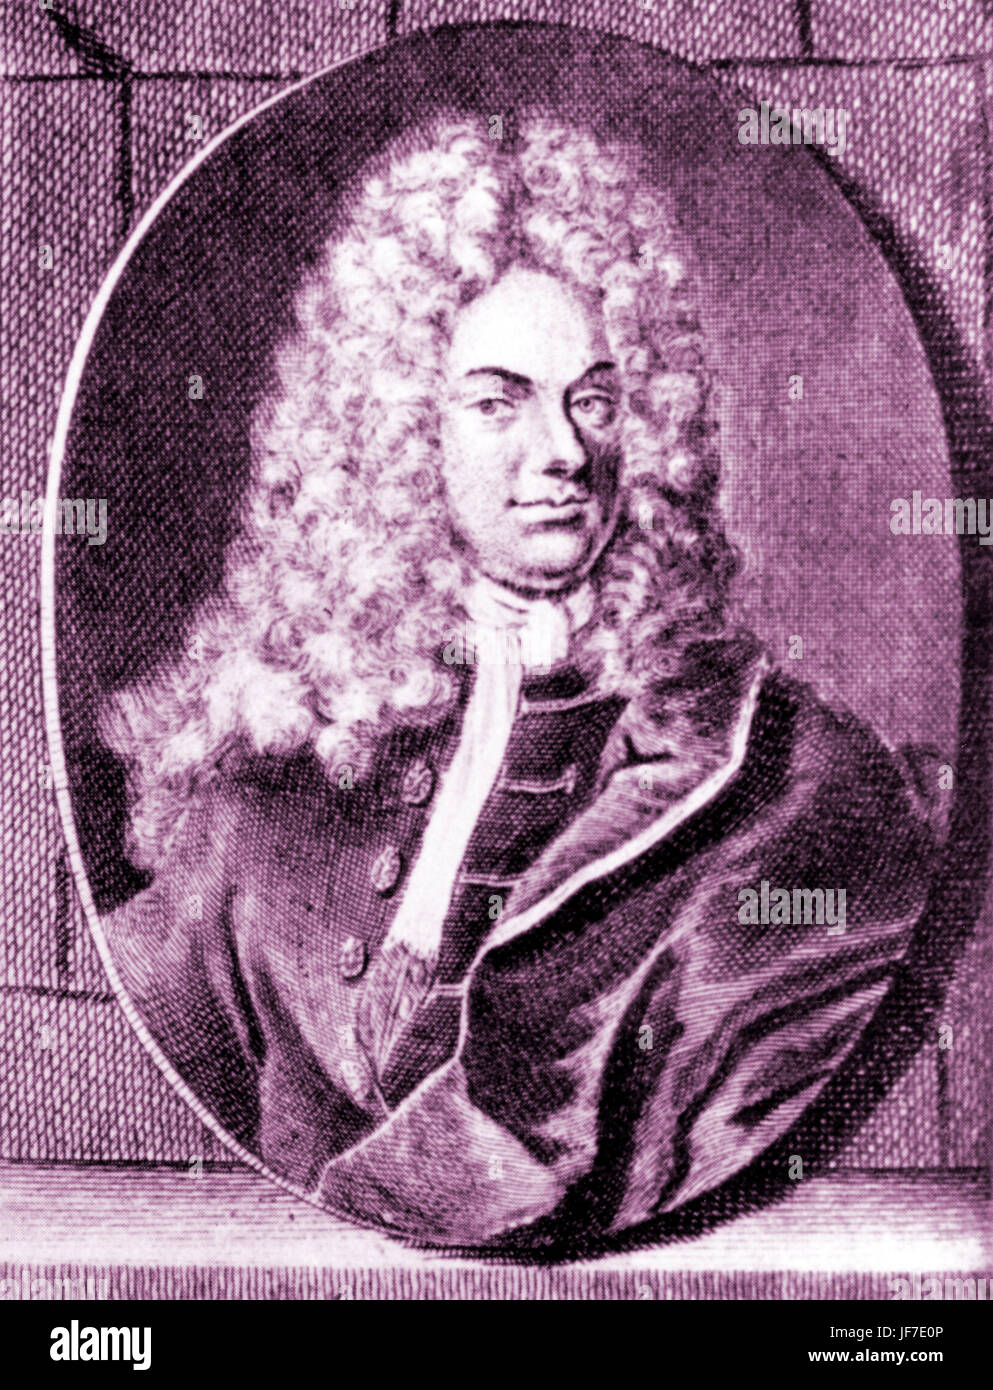 BROCKES, Barthold Heinrich German Poet, 1680-1747.  wrote the 'Passion', set to music by KEISER, HANDEL, TELEMANN, MATTHESON Engraving by C Fritzsch Stock Photo